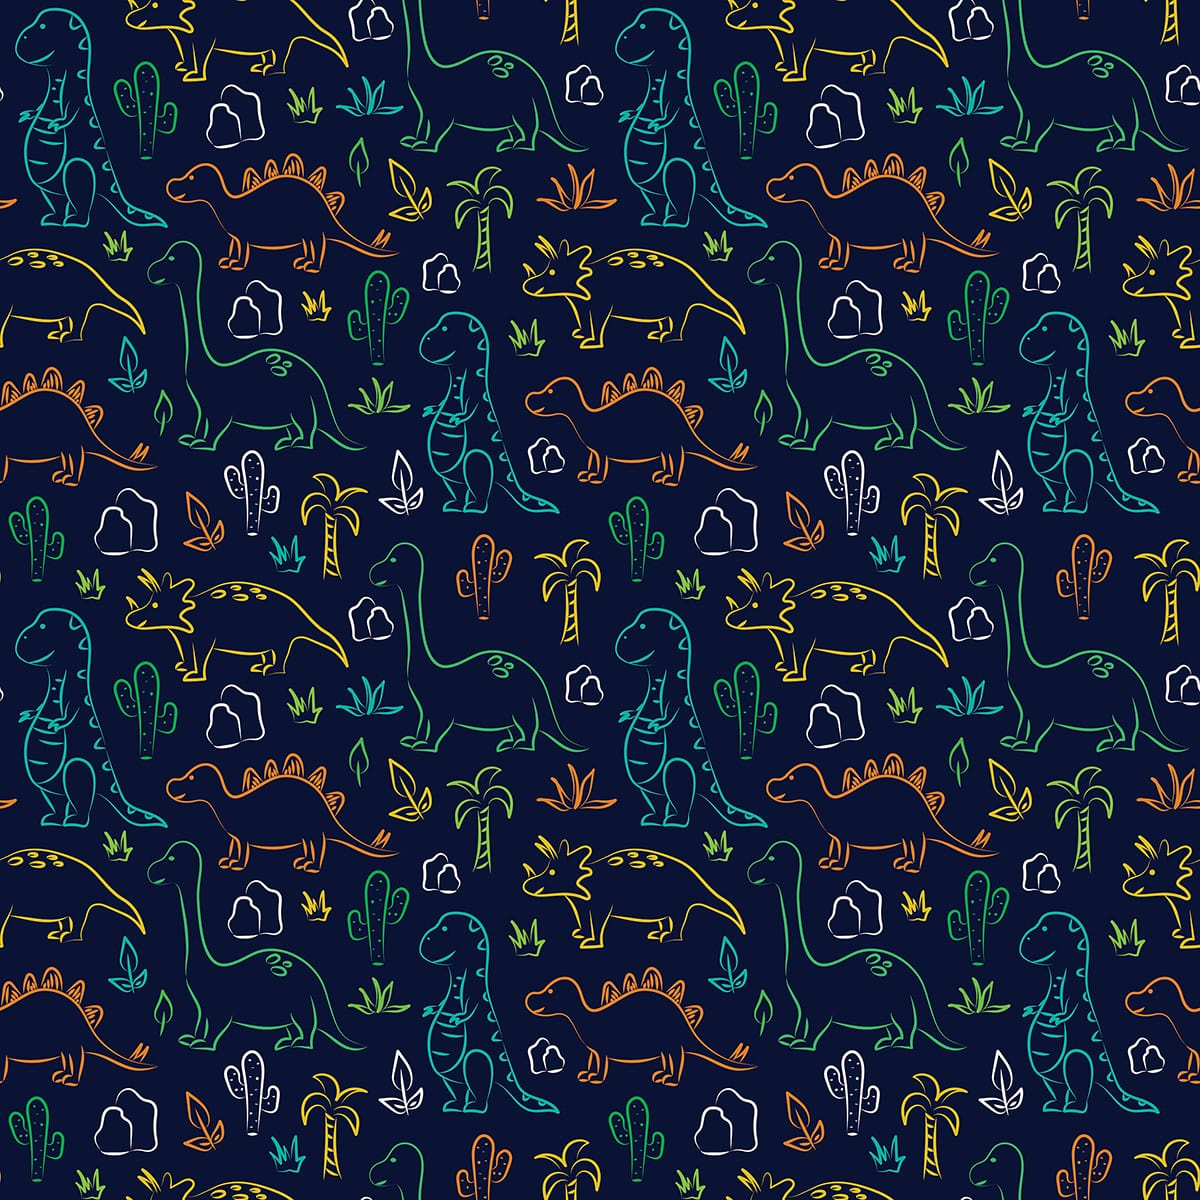 A pattern of dinosaurs and plants